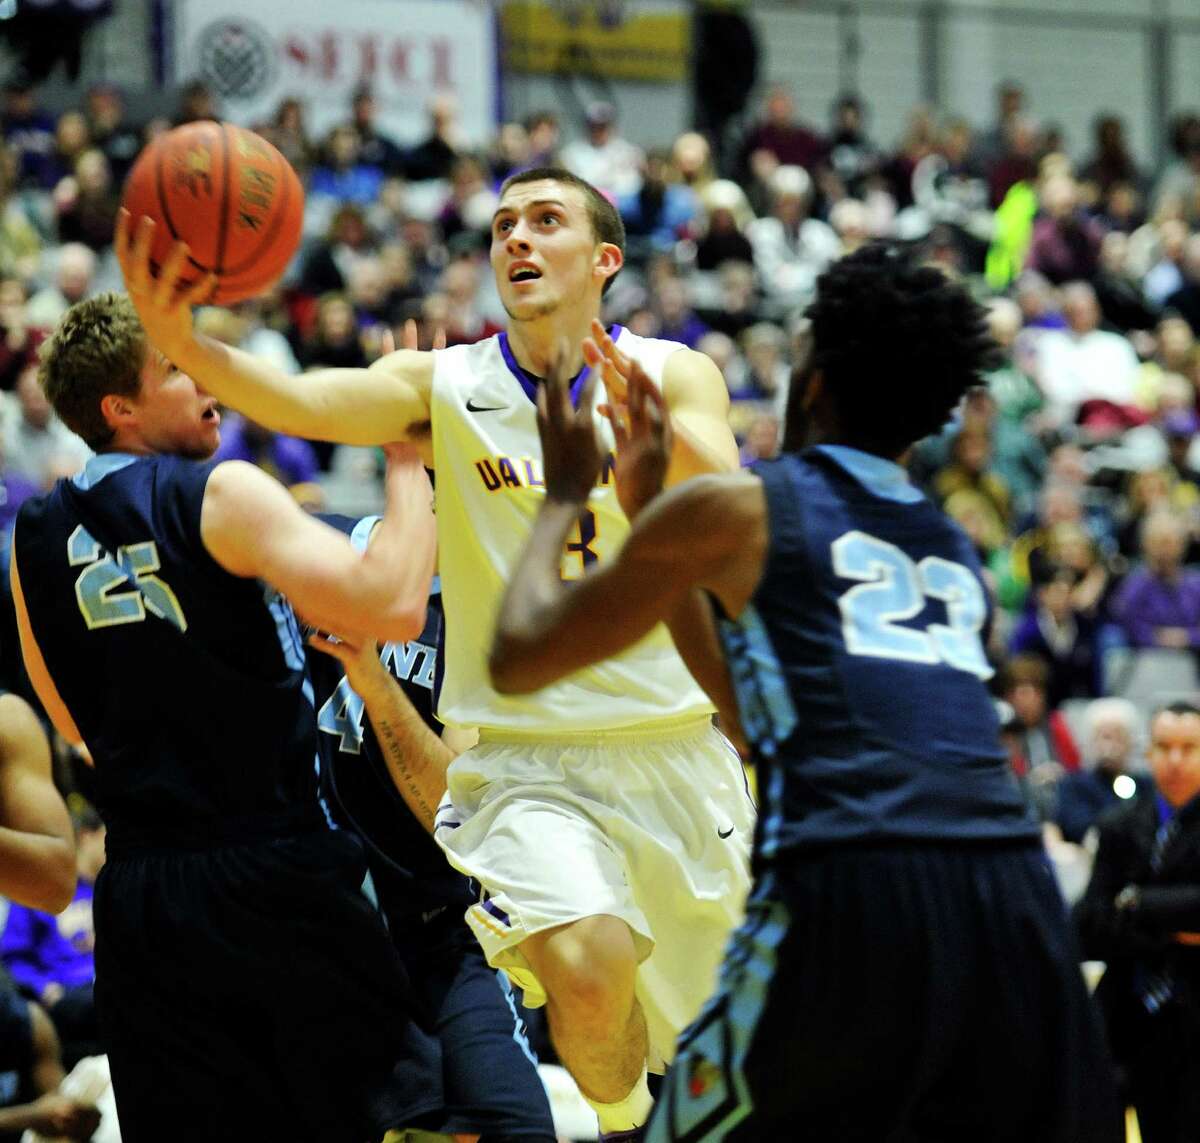 Joe Cremo of the UAlbany drives to the basket through two Maine players during their game on Sunday, Feb. 14, 2016, in Albany, N.Y. (Paul Buckowski / Times Union)